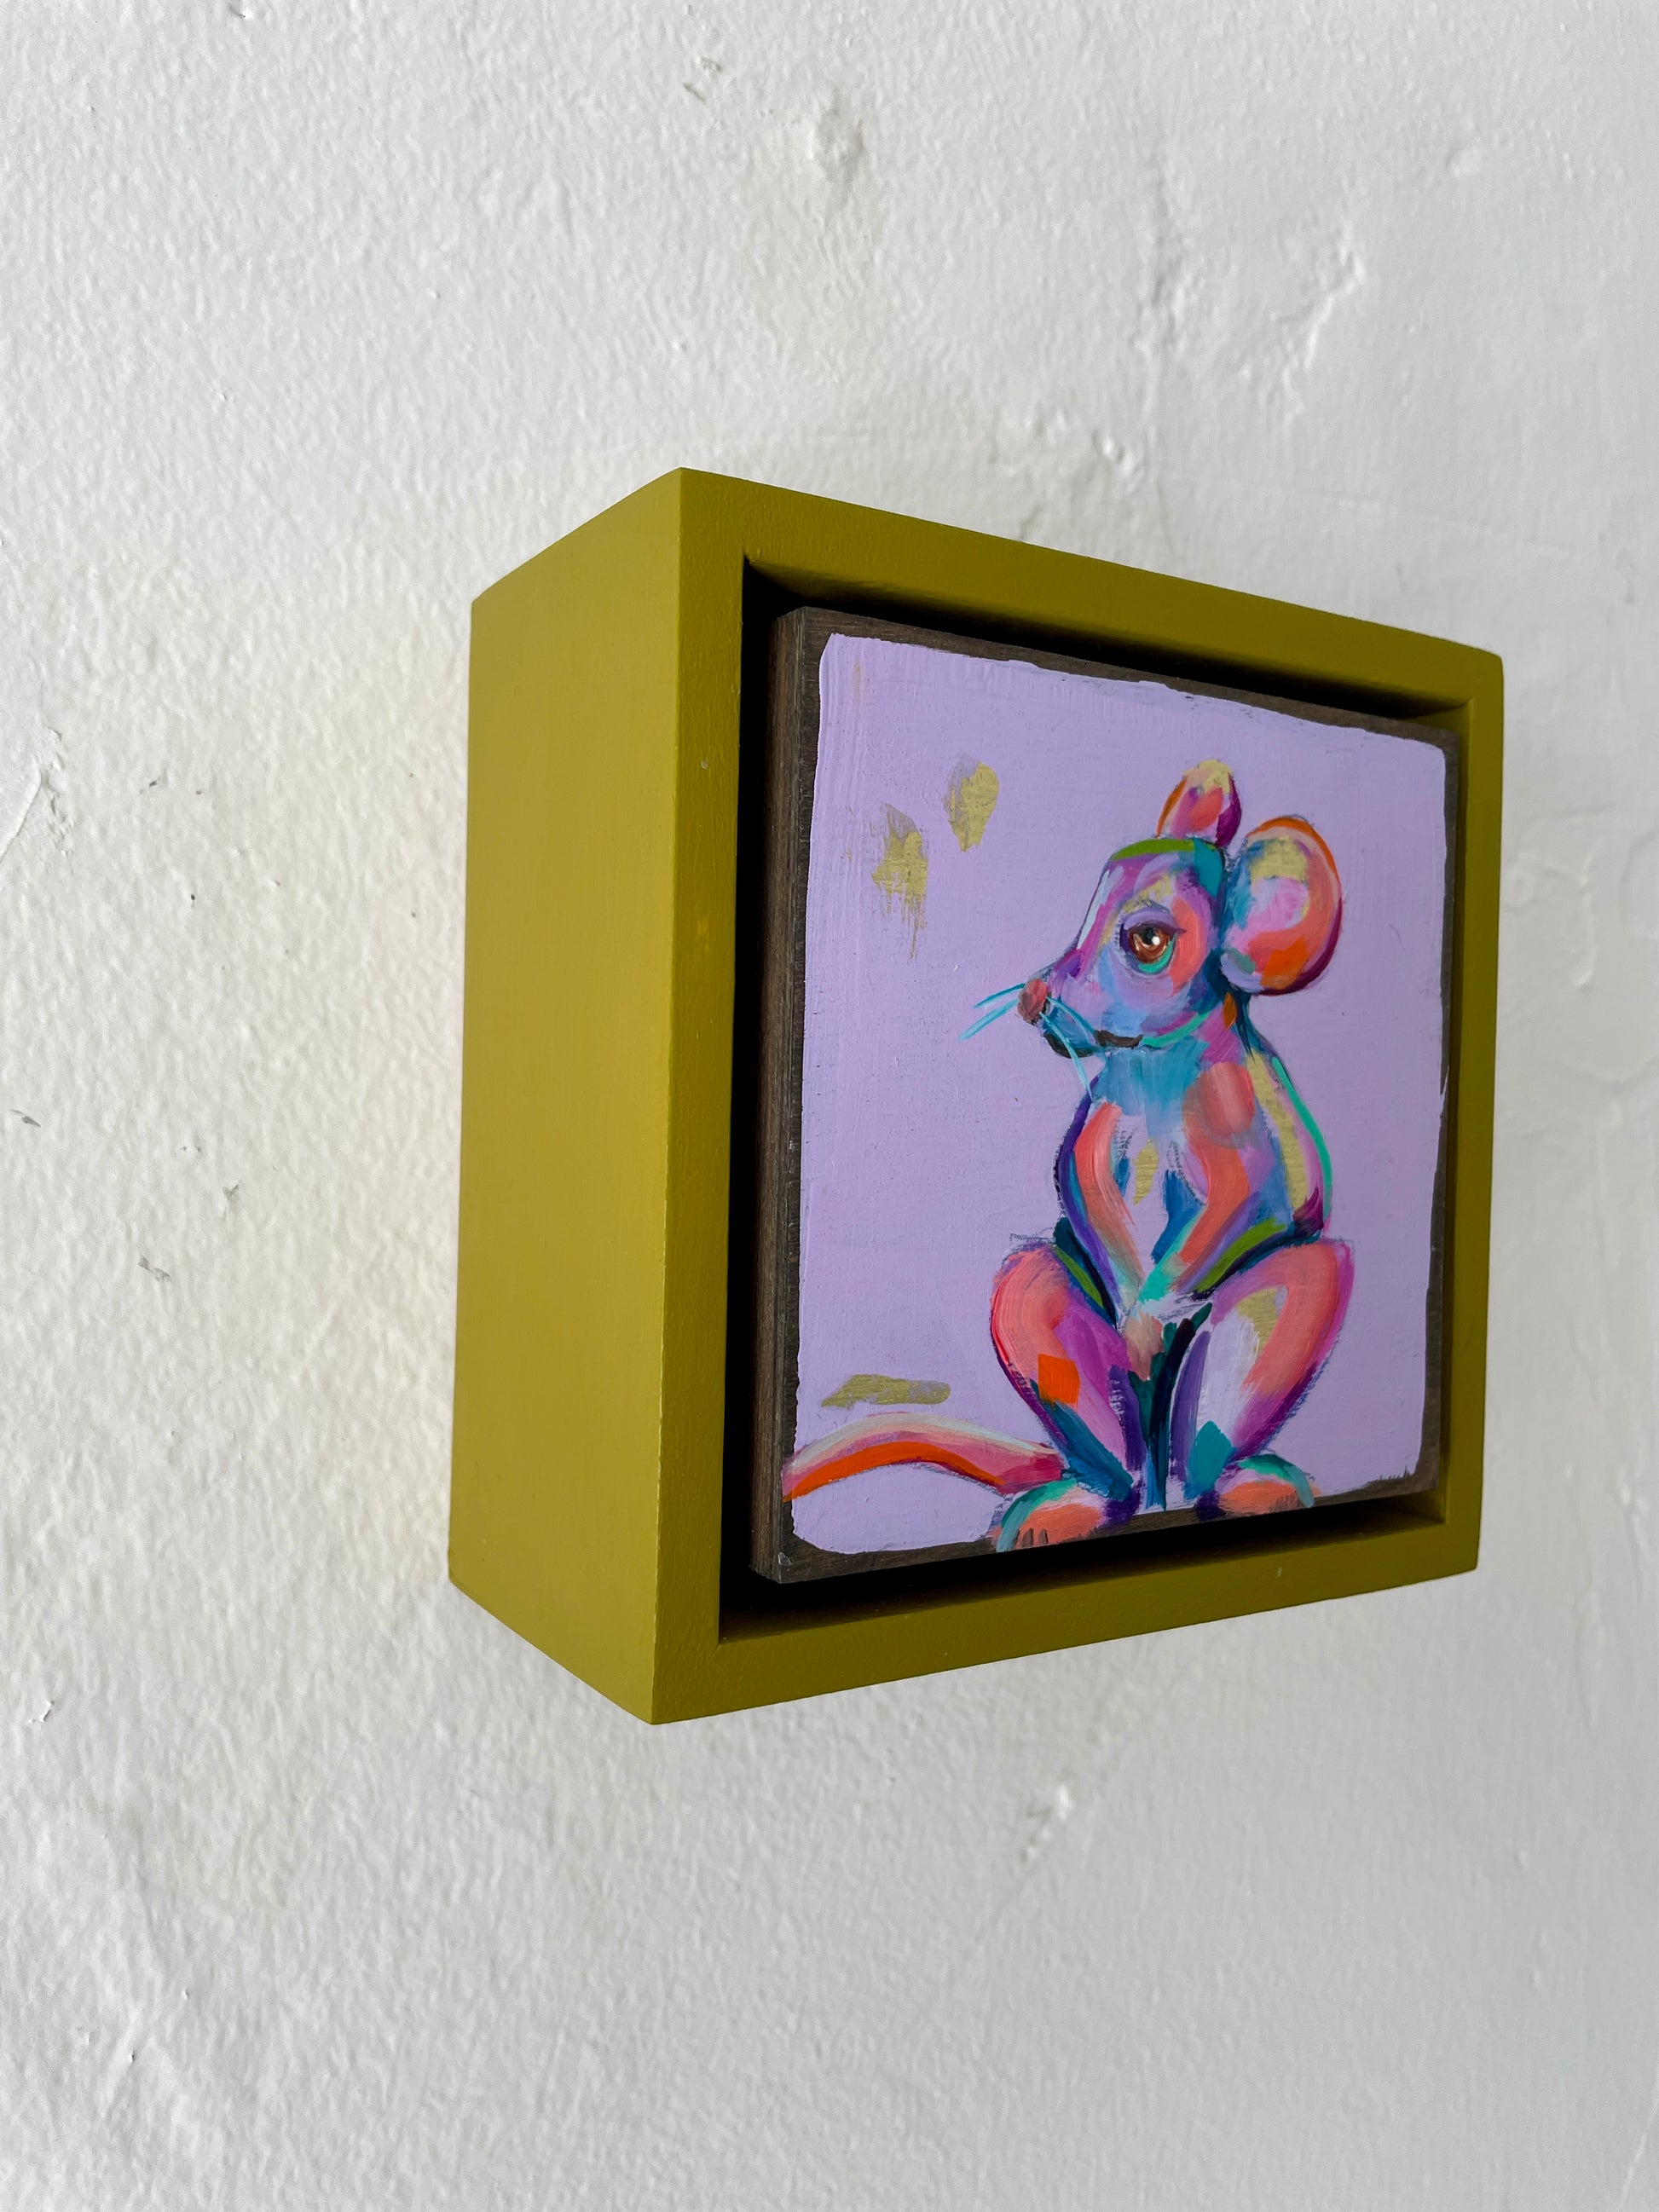 Colorful whimsical painting of a mouse in blues, purples, pinks with touch of gold leaf; 5"x5" incl painted frame; artist Shaney Watters; side view on wall